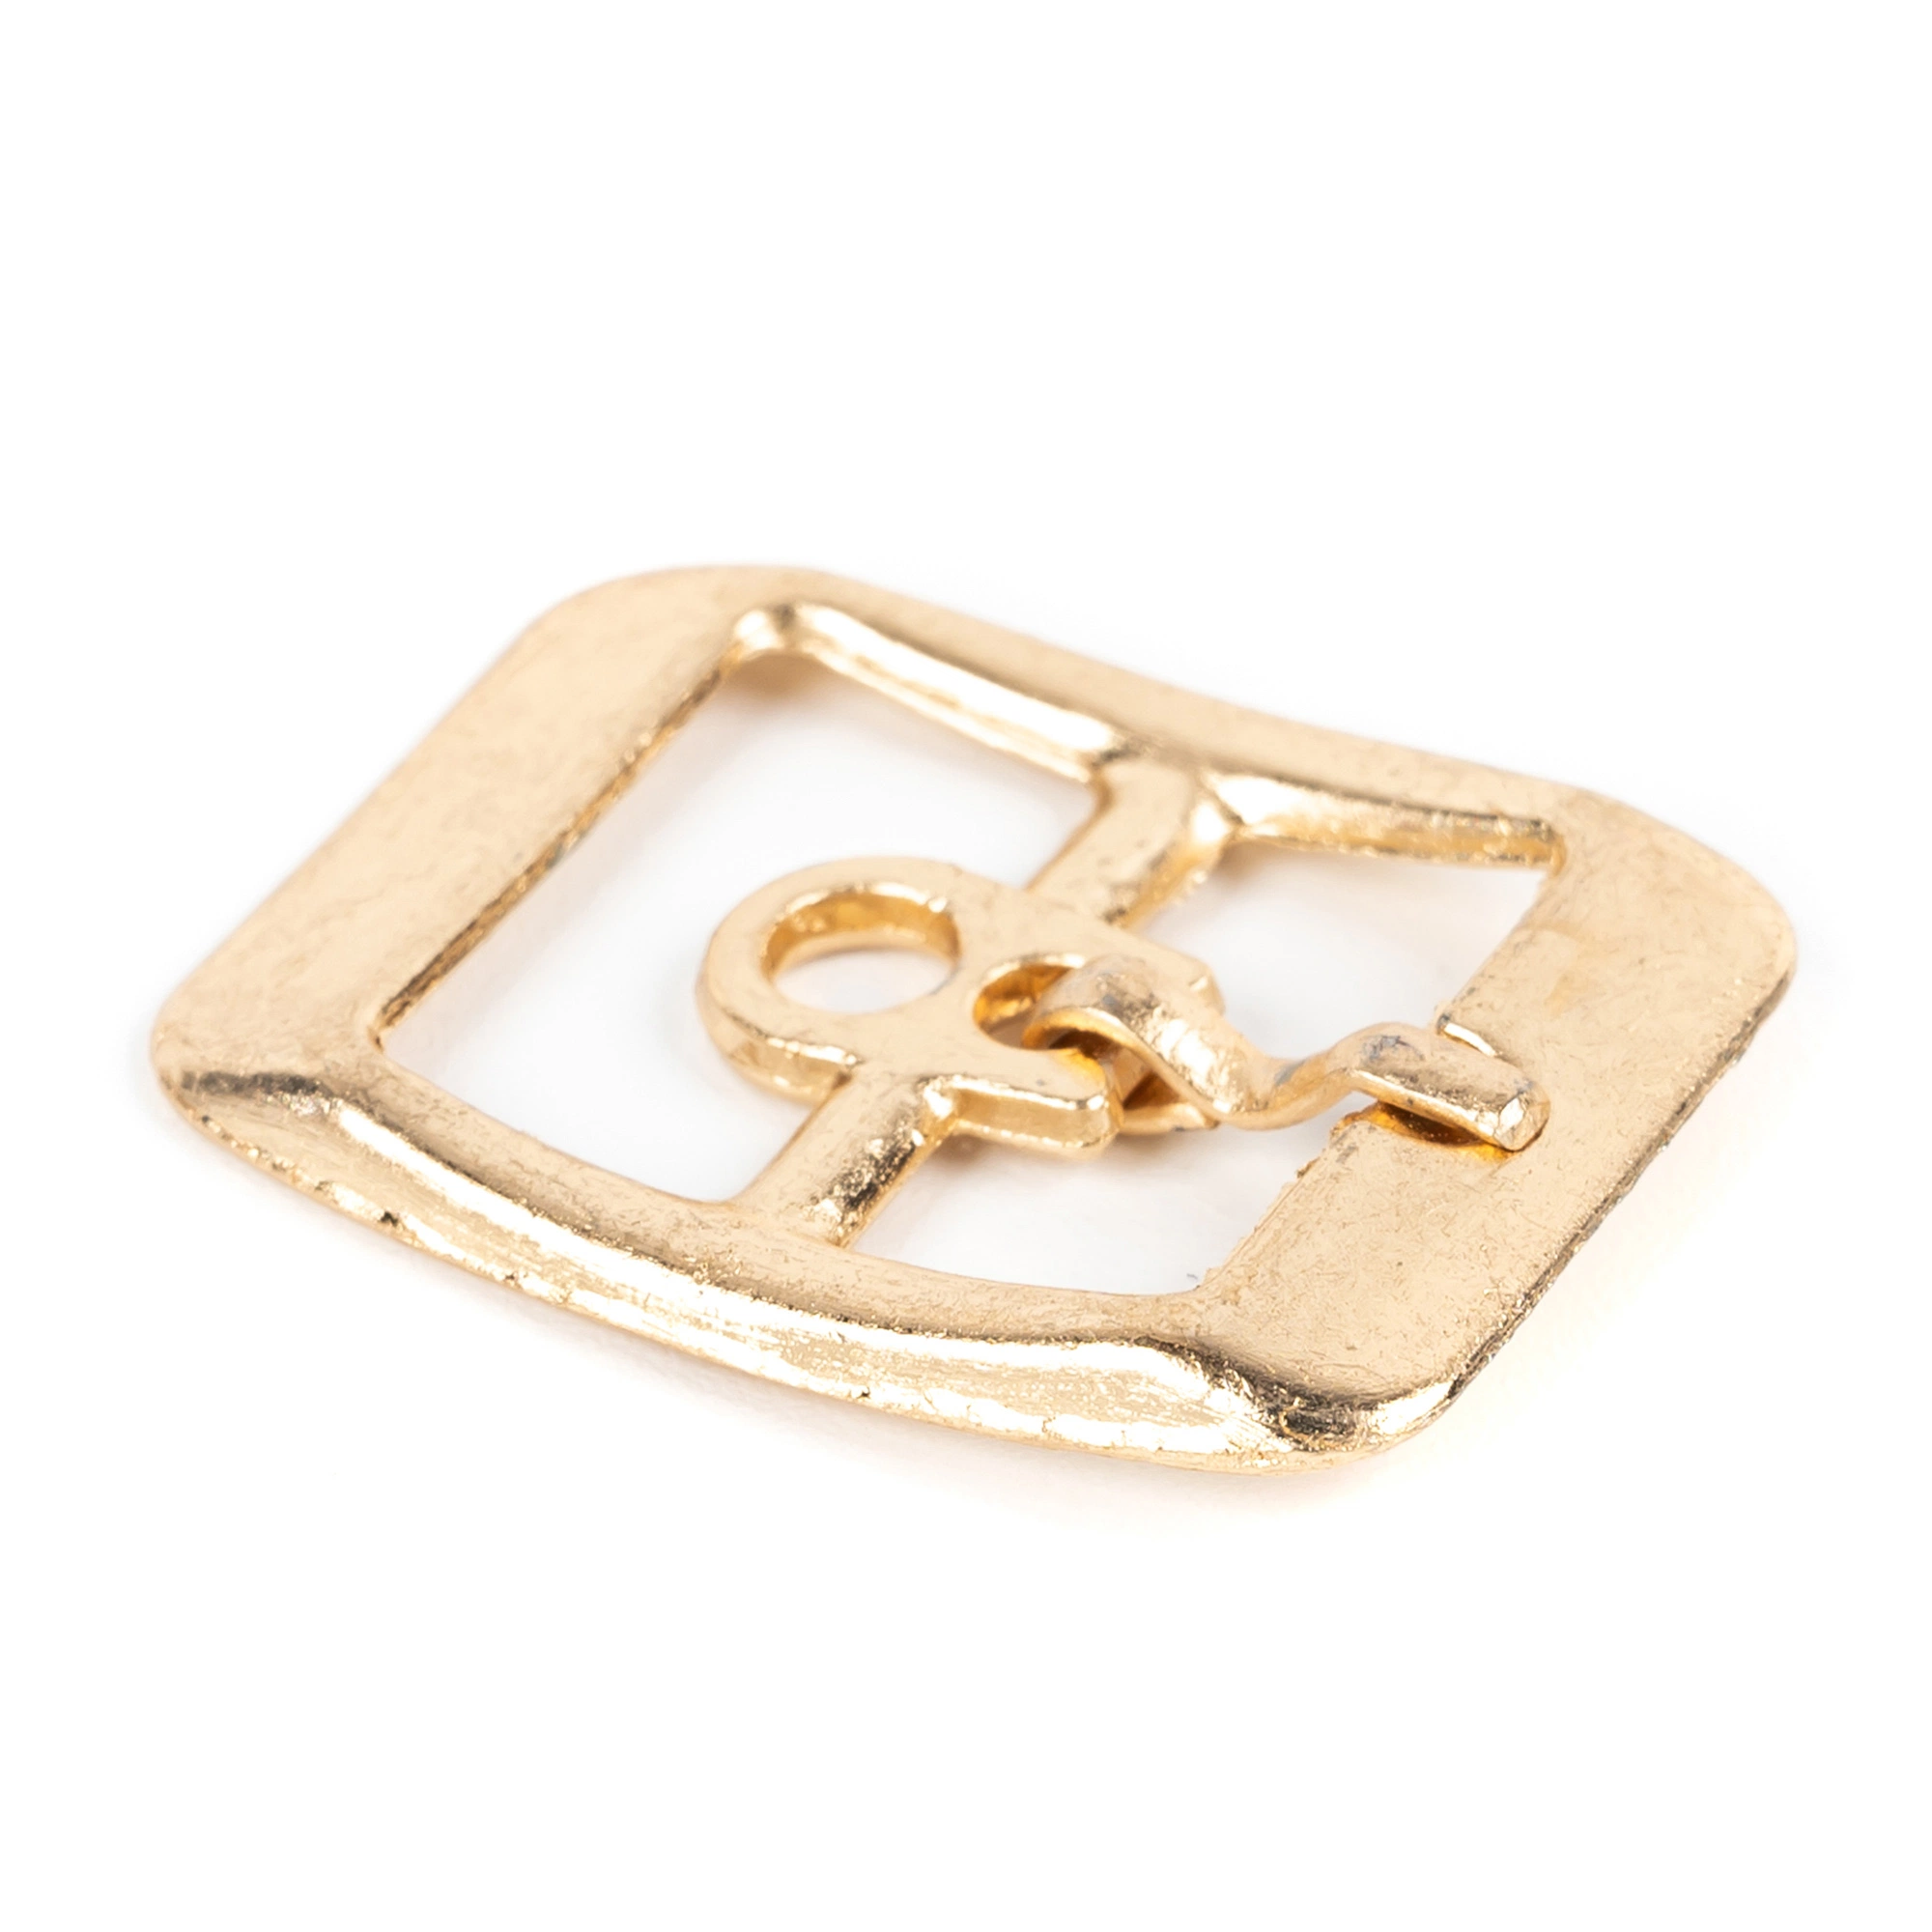 Accessories for Bags Square Belt Adjusting Buckle Clothing Hardware Shoe Buckle